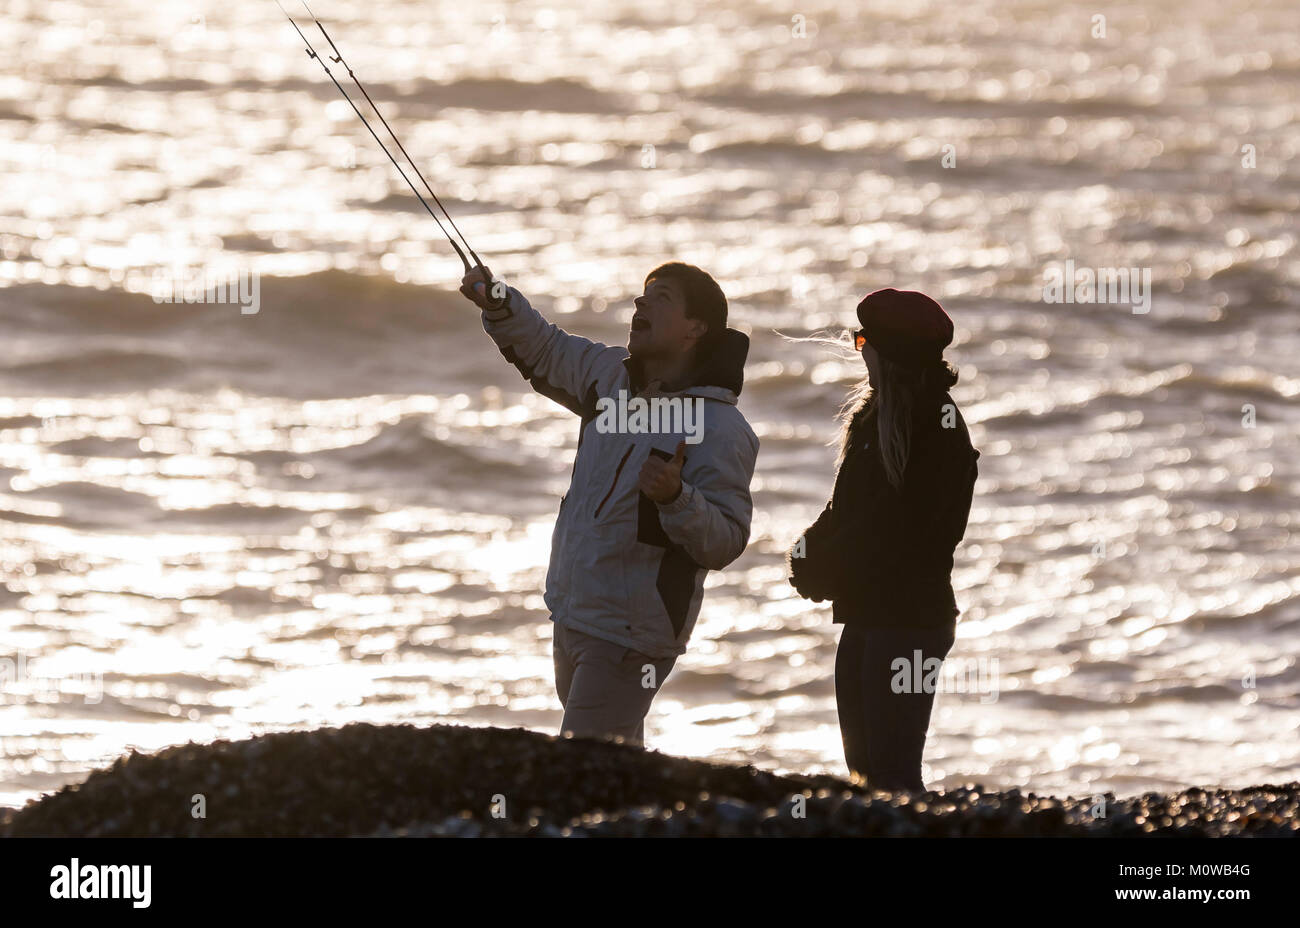 Couple on a beach flying a kite in late evening light Stock Photo - Alamy